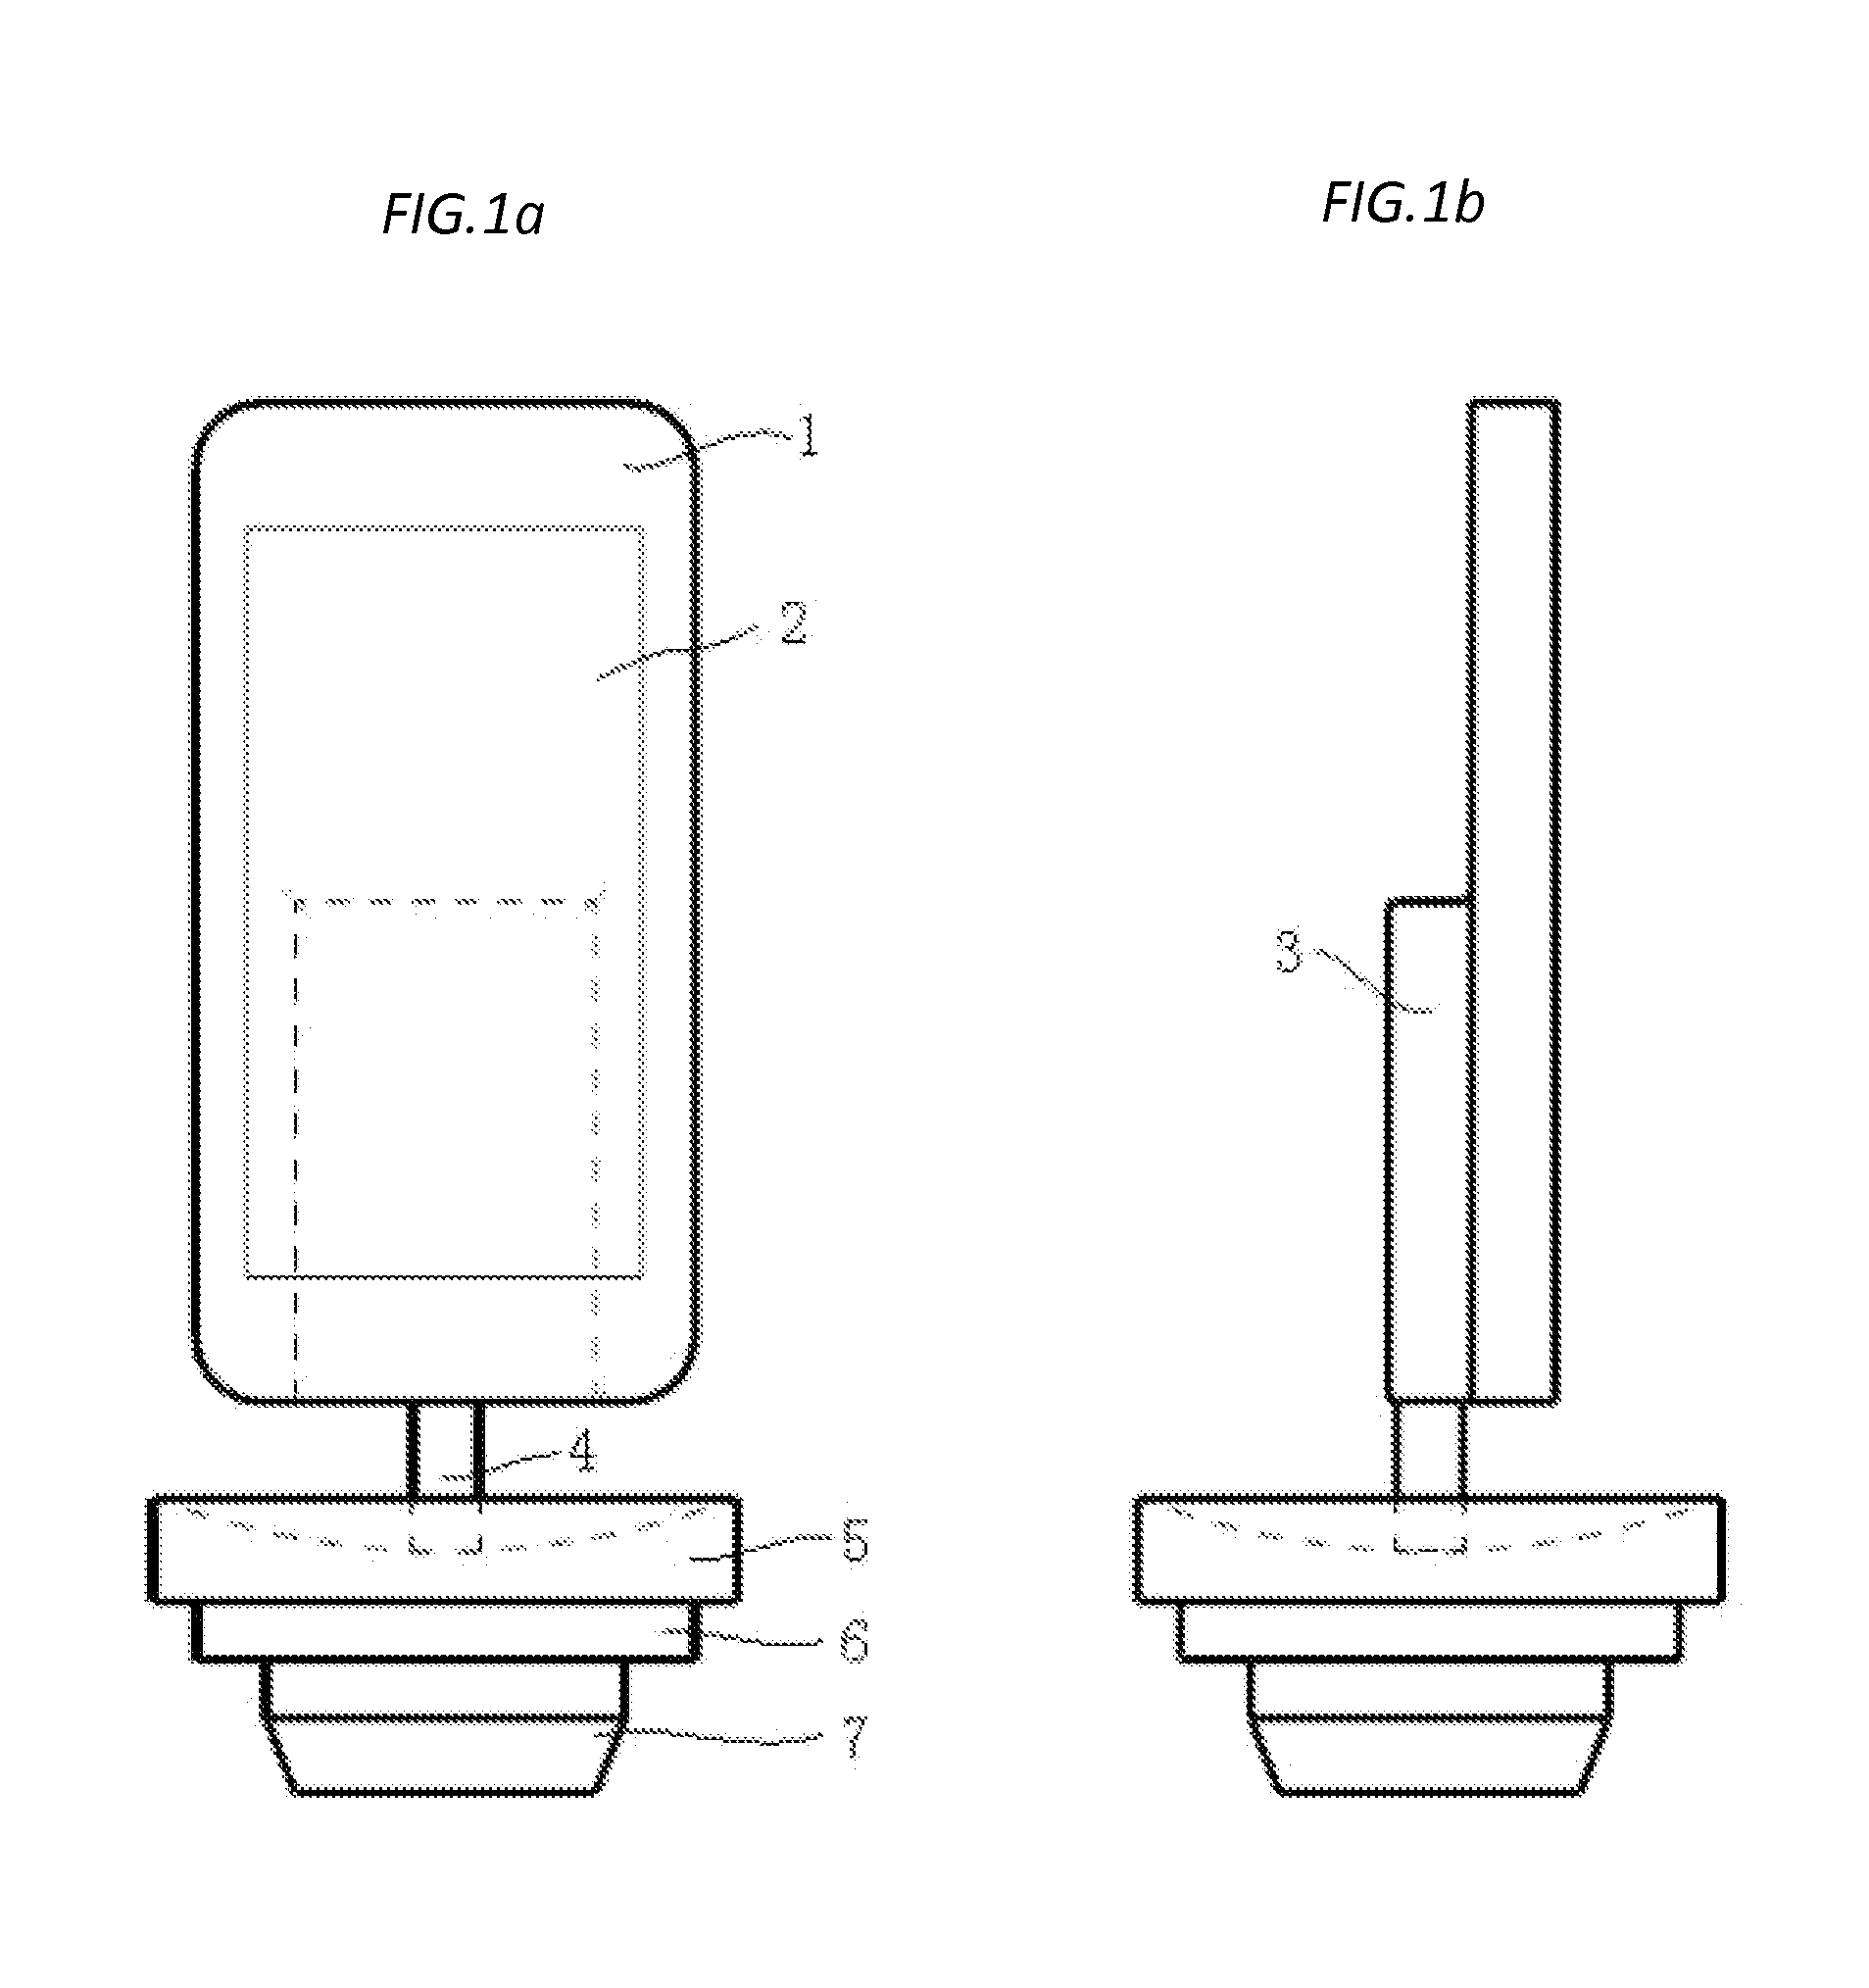 Handheld apparatus for measuring lens surface power